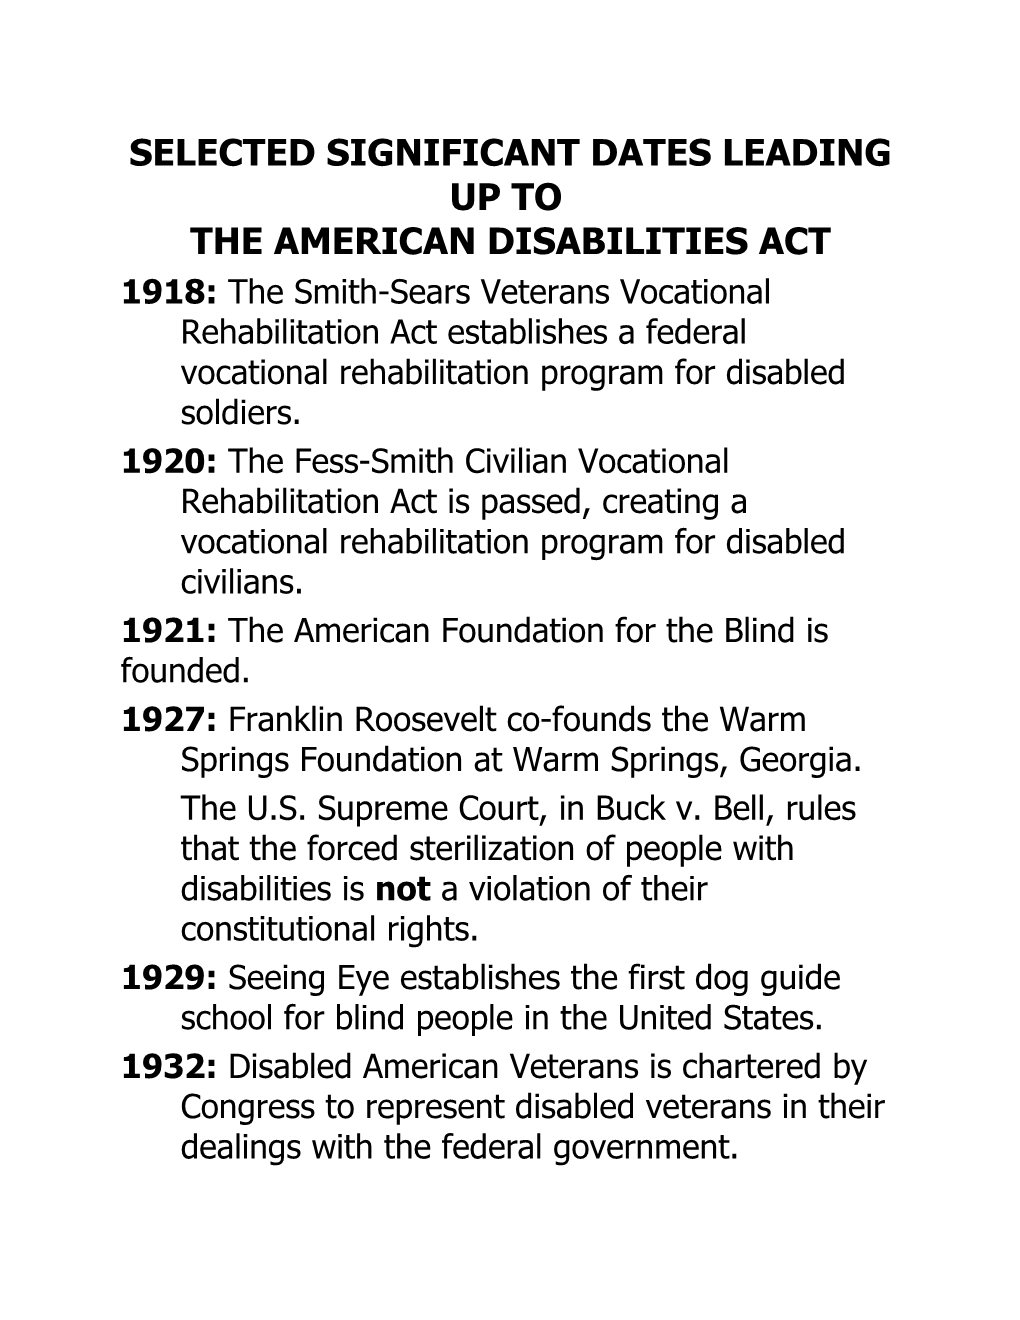 The ADA Timeline